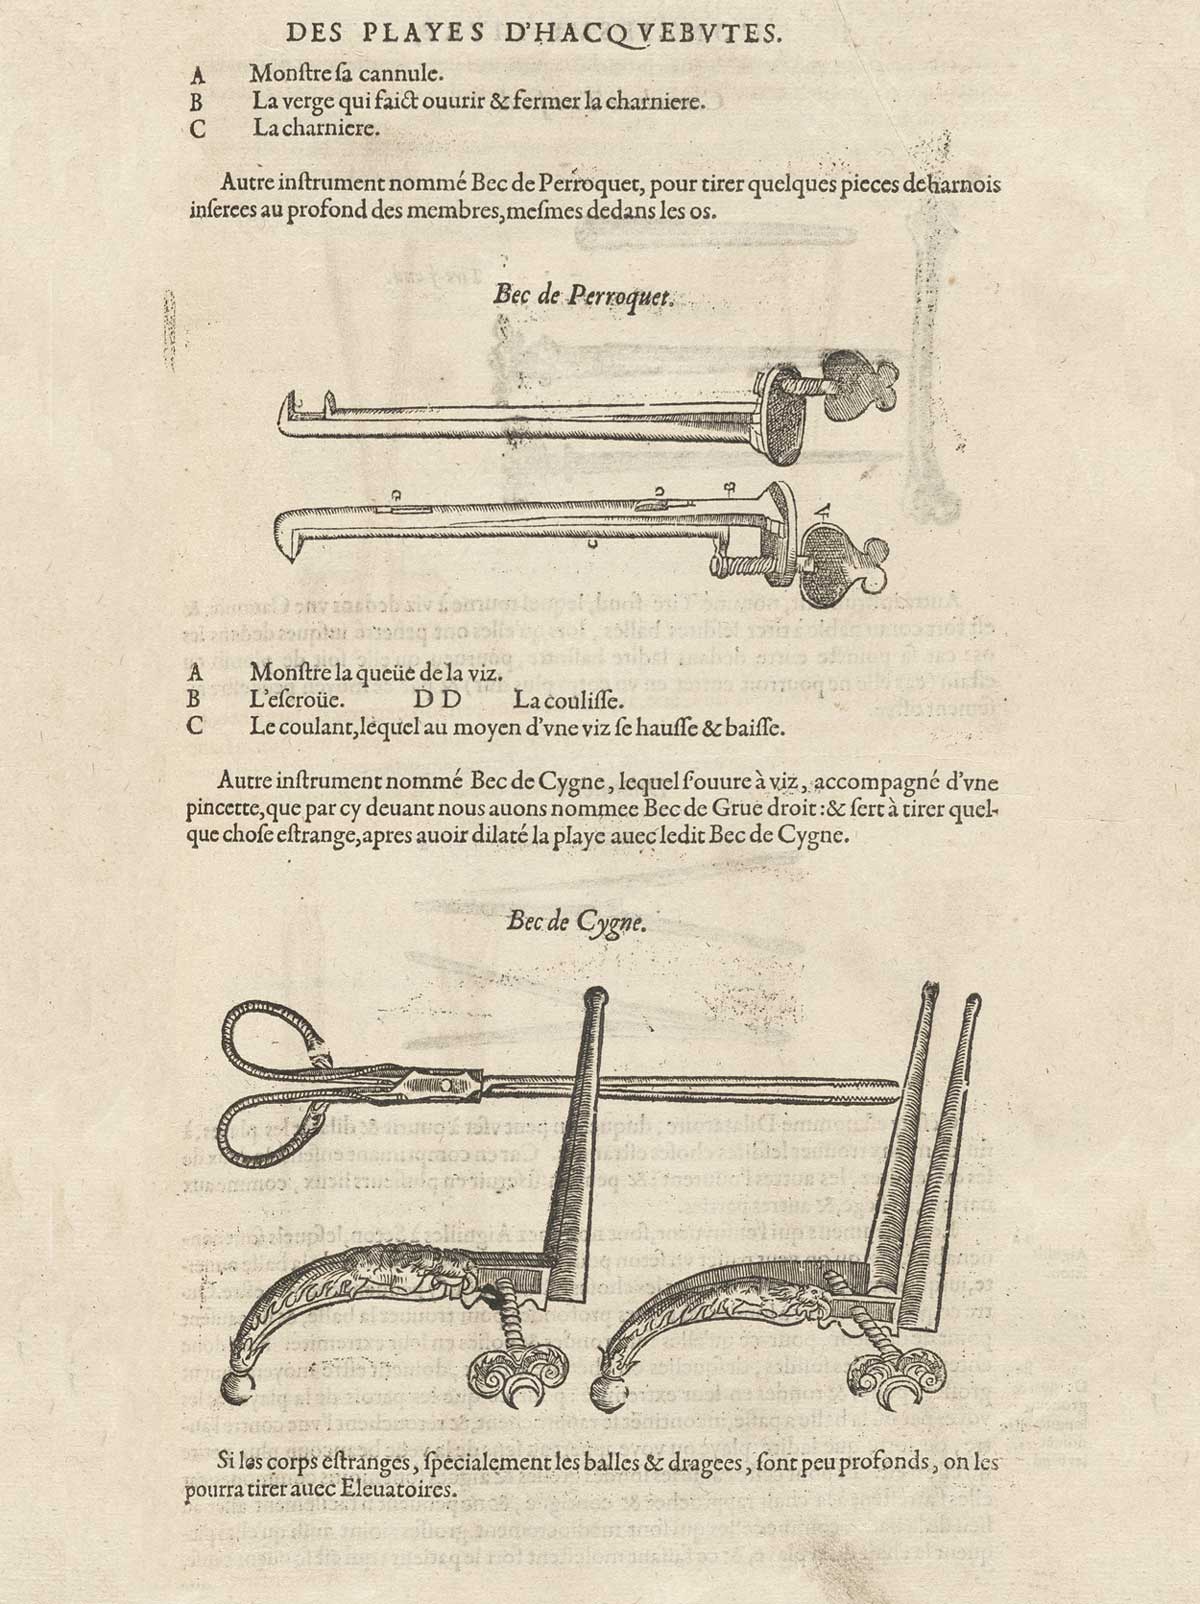 Page CCCCXXXV which features surgeon's tools made like a parakeet bill (Bec de Perroquet) and a swan's bill (Bec de Cygne)